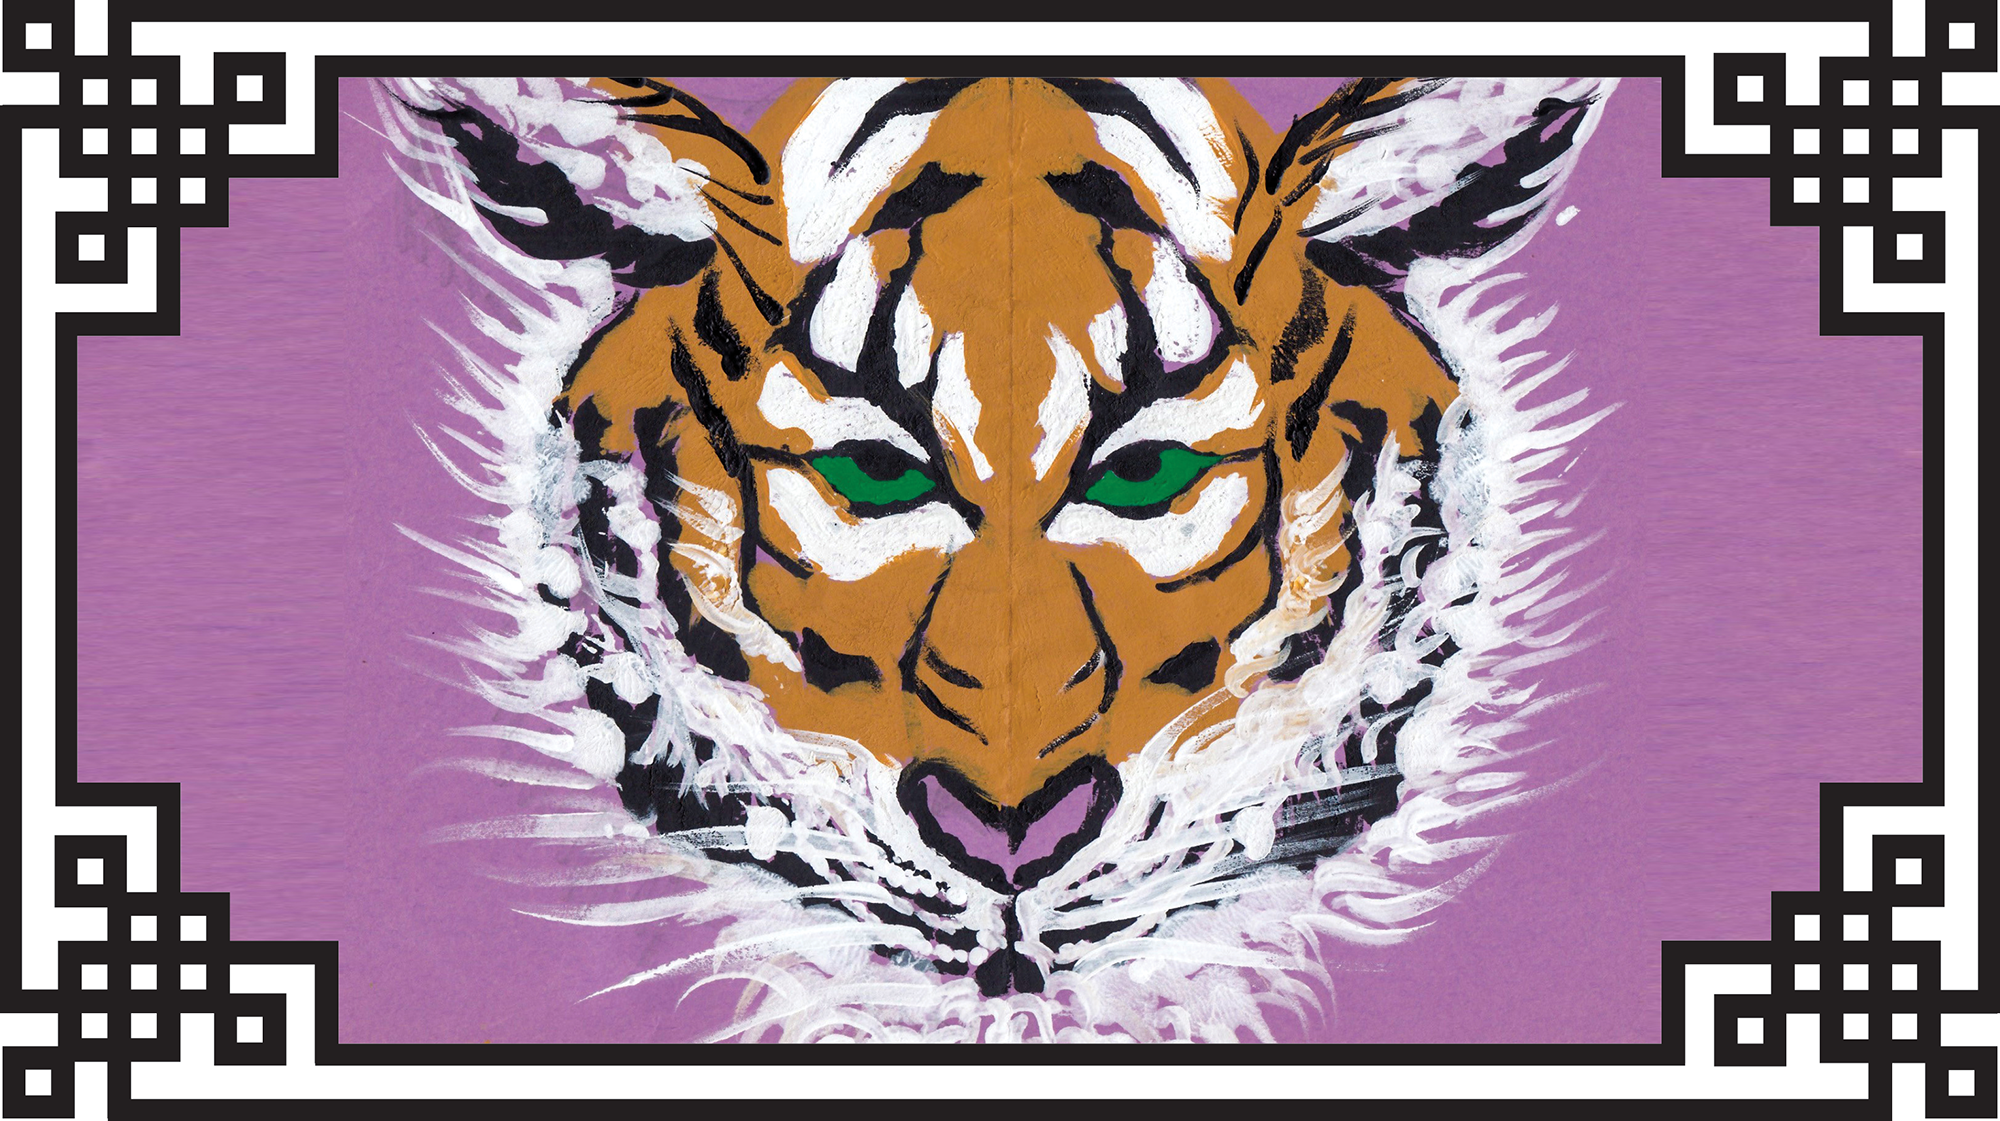 Landscape Yue Moon artwork of a Tiger on a purple background with a traditional Chinese black & white border around it.